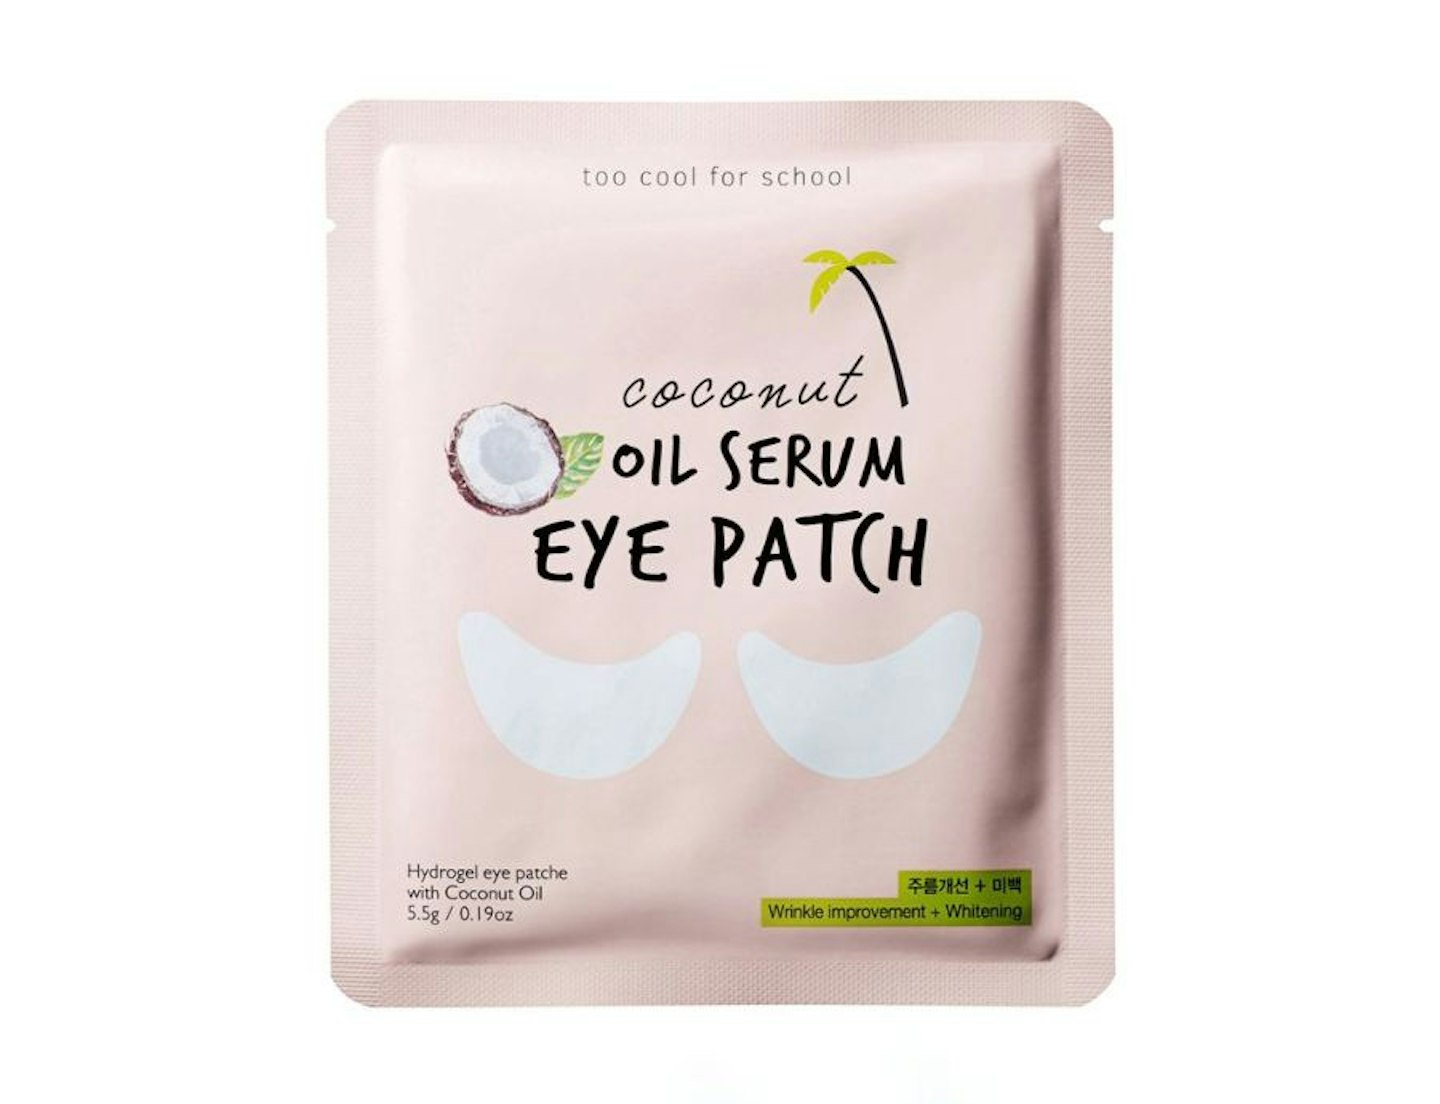 Too Cool For School Coconut Oil Serum Eye Patch, 6.50, cultbeauty.co.uk